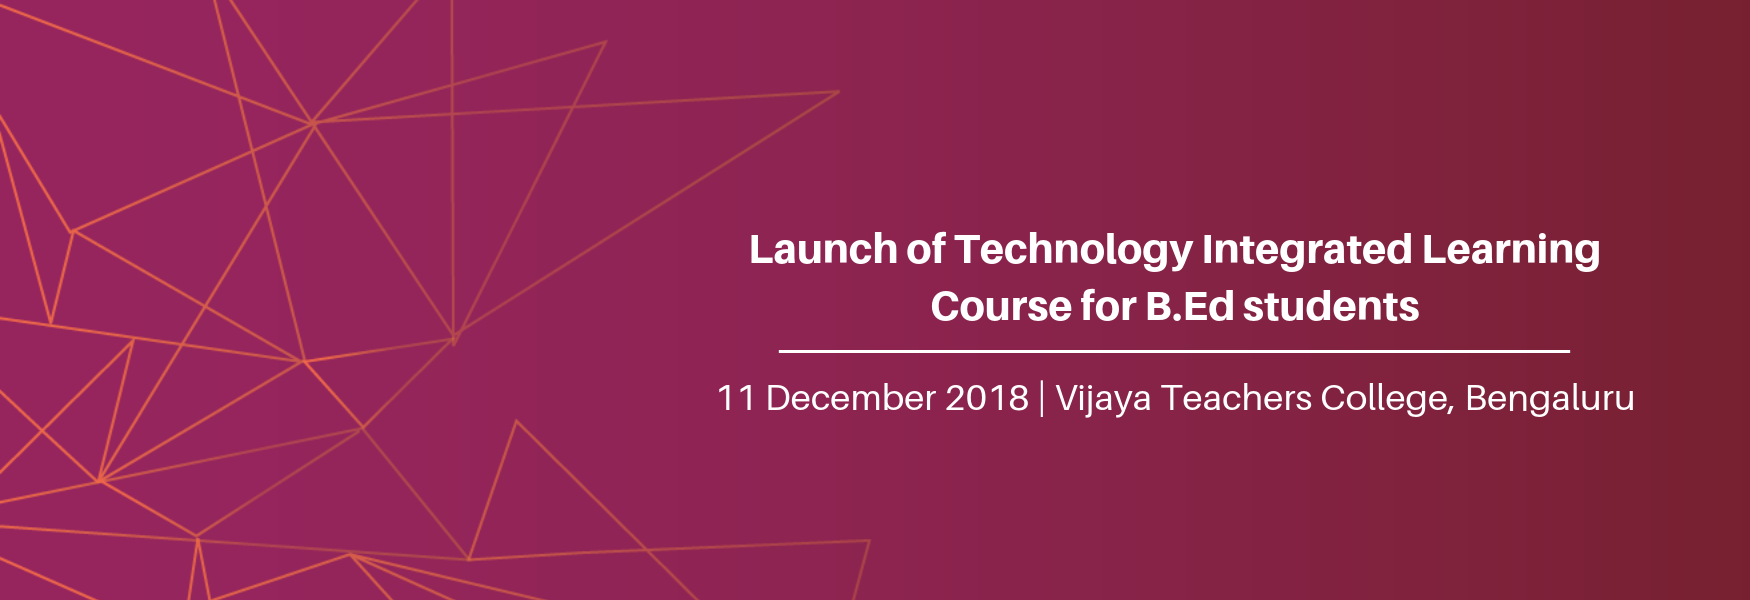 Launch of Technology Integrated Learning Course for B.Ed students